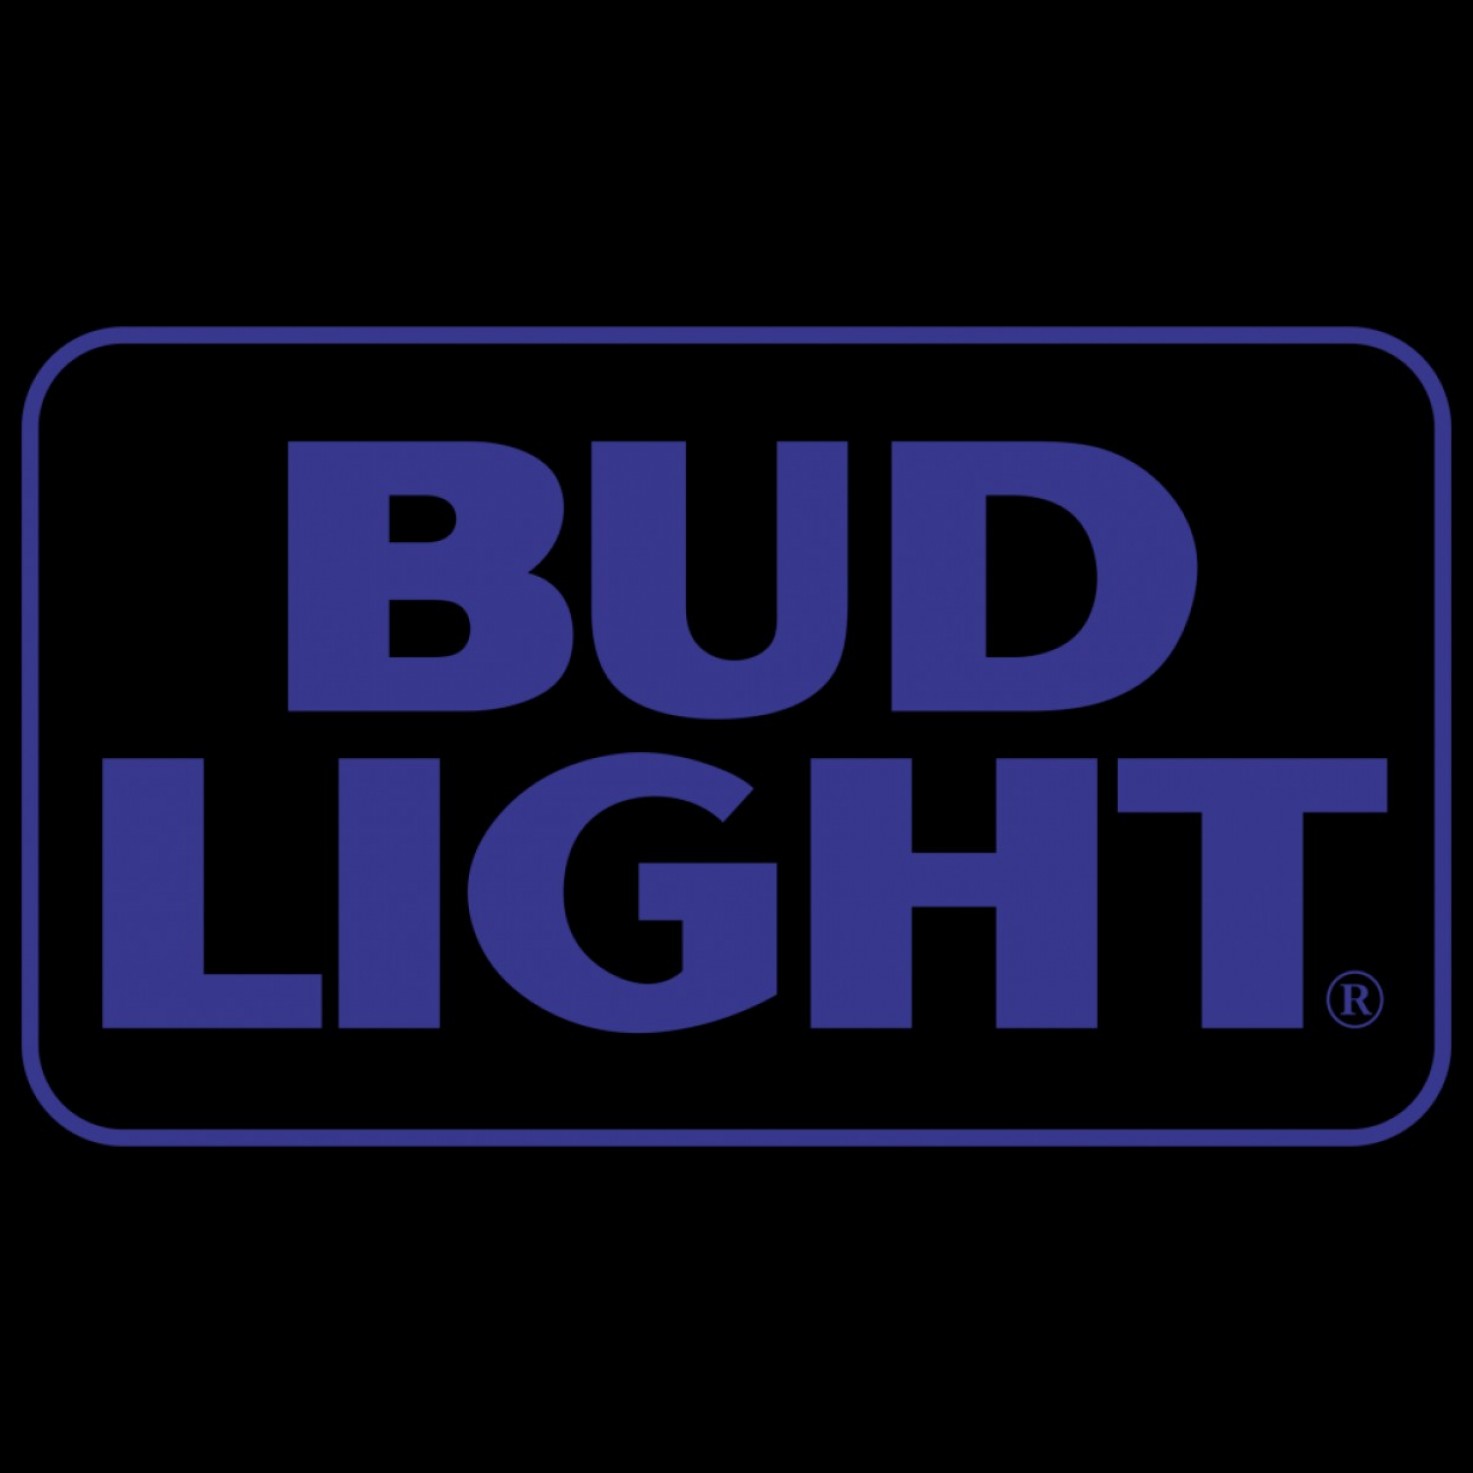 4,077 Bud light vector images at Vectorified.com